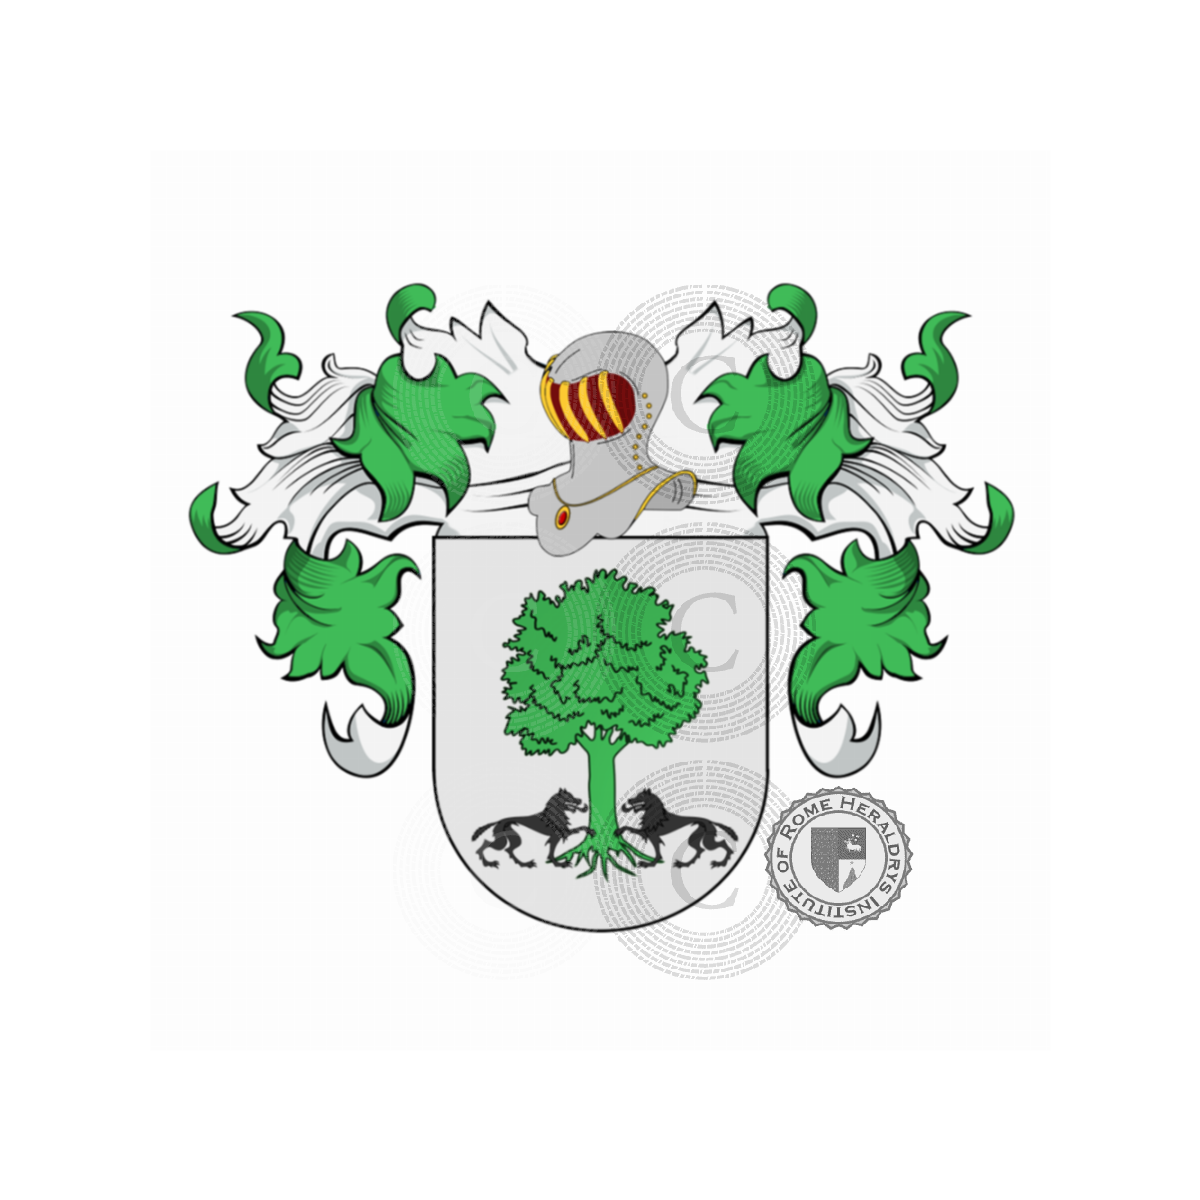 Espinosa Name Meaning, Family History, Family Crest & Coats of Arms